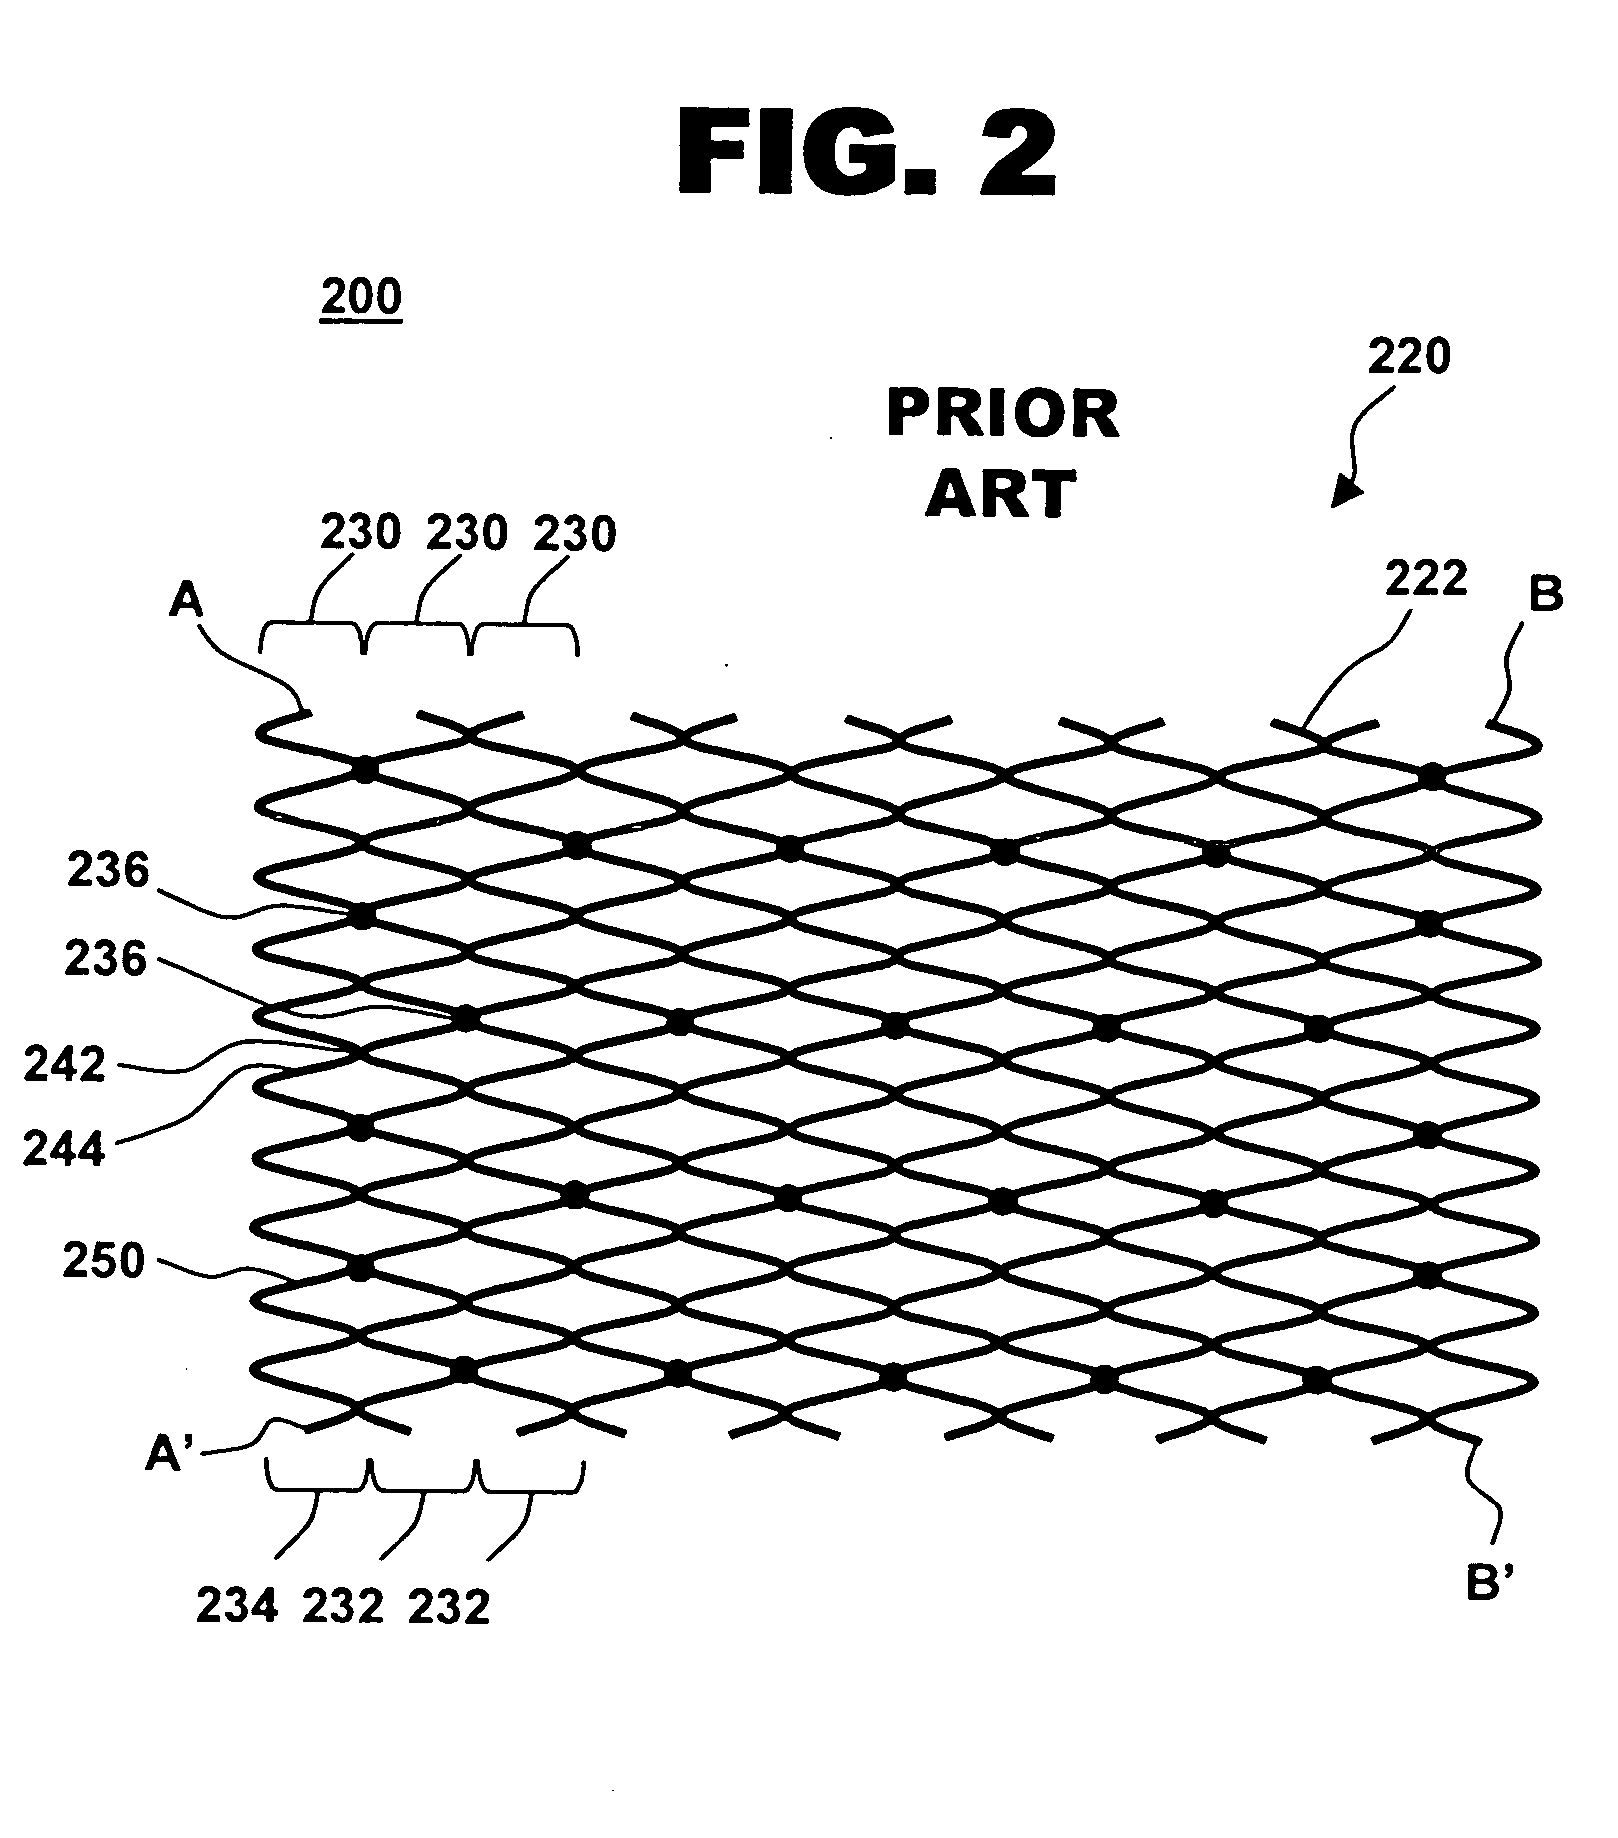 Coated stent having protruding crowns and elongated struts